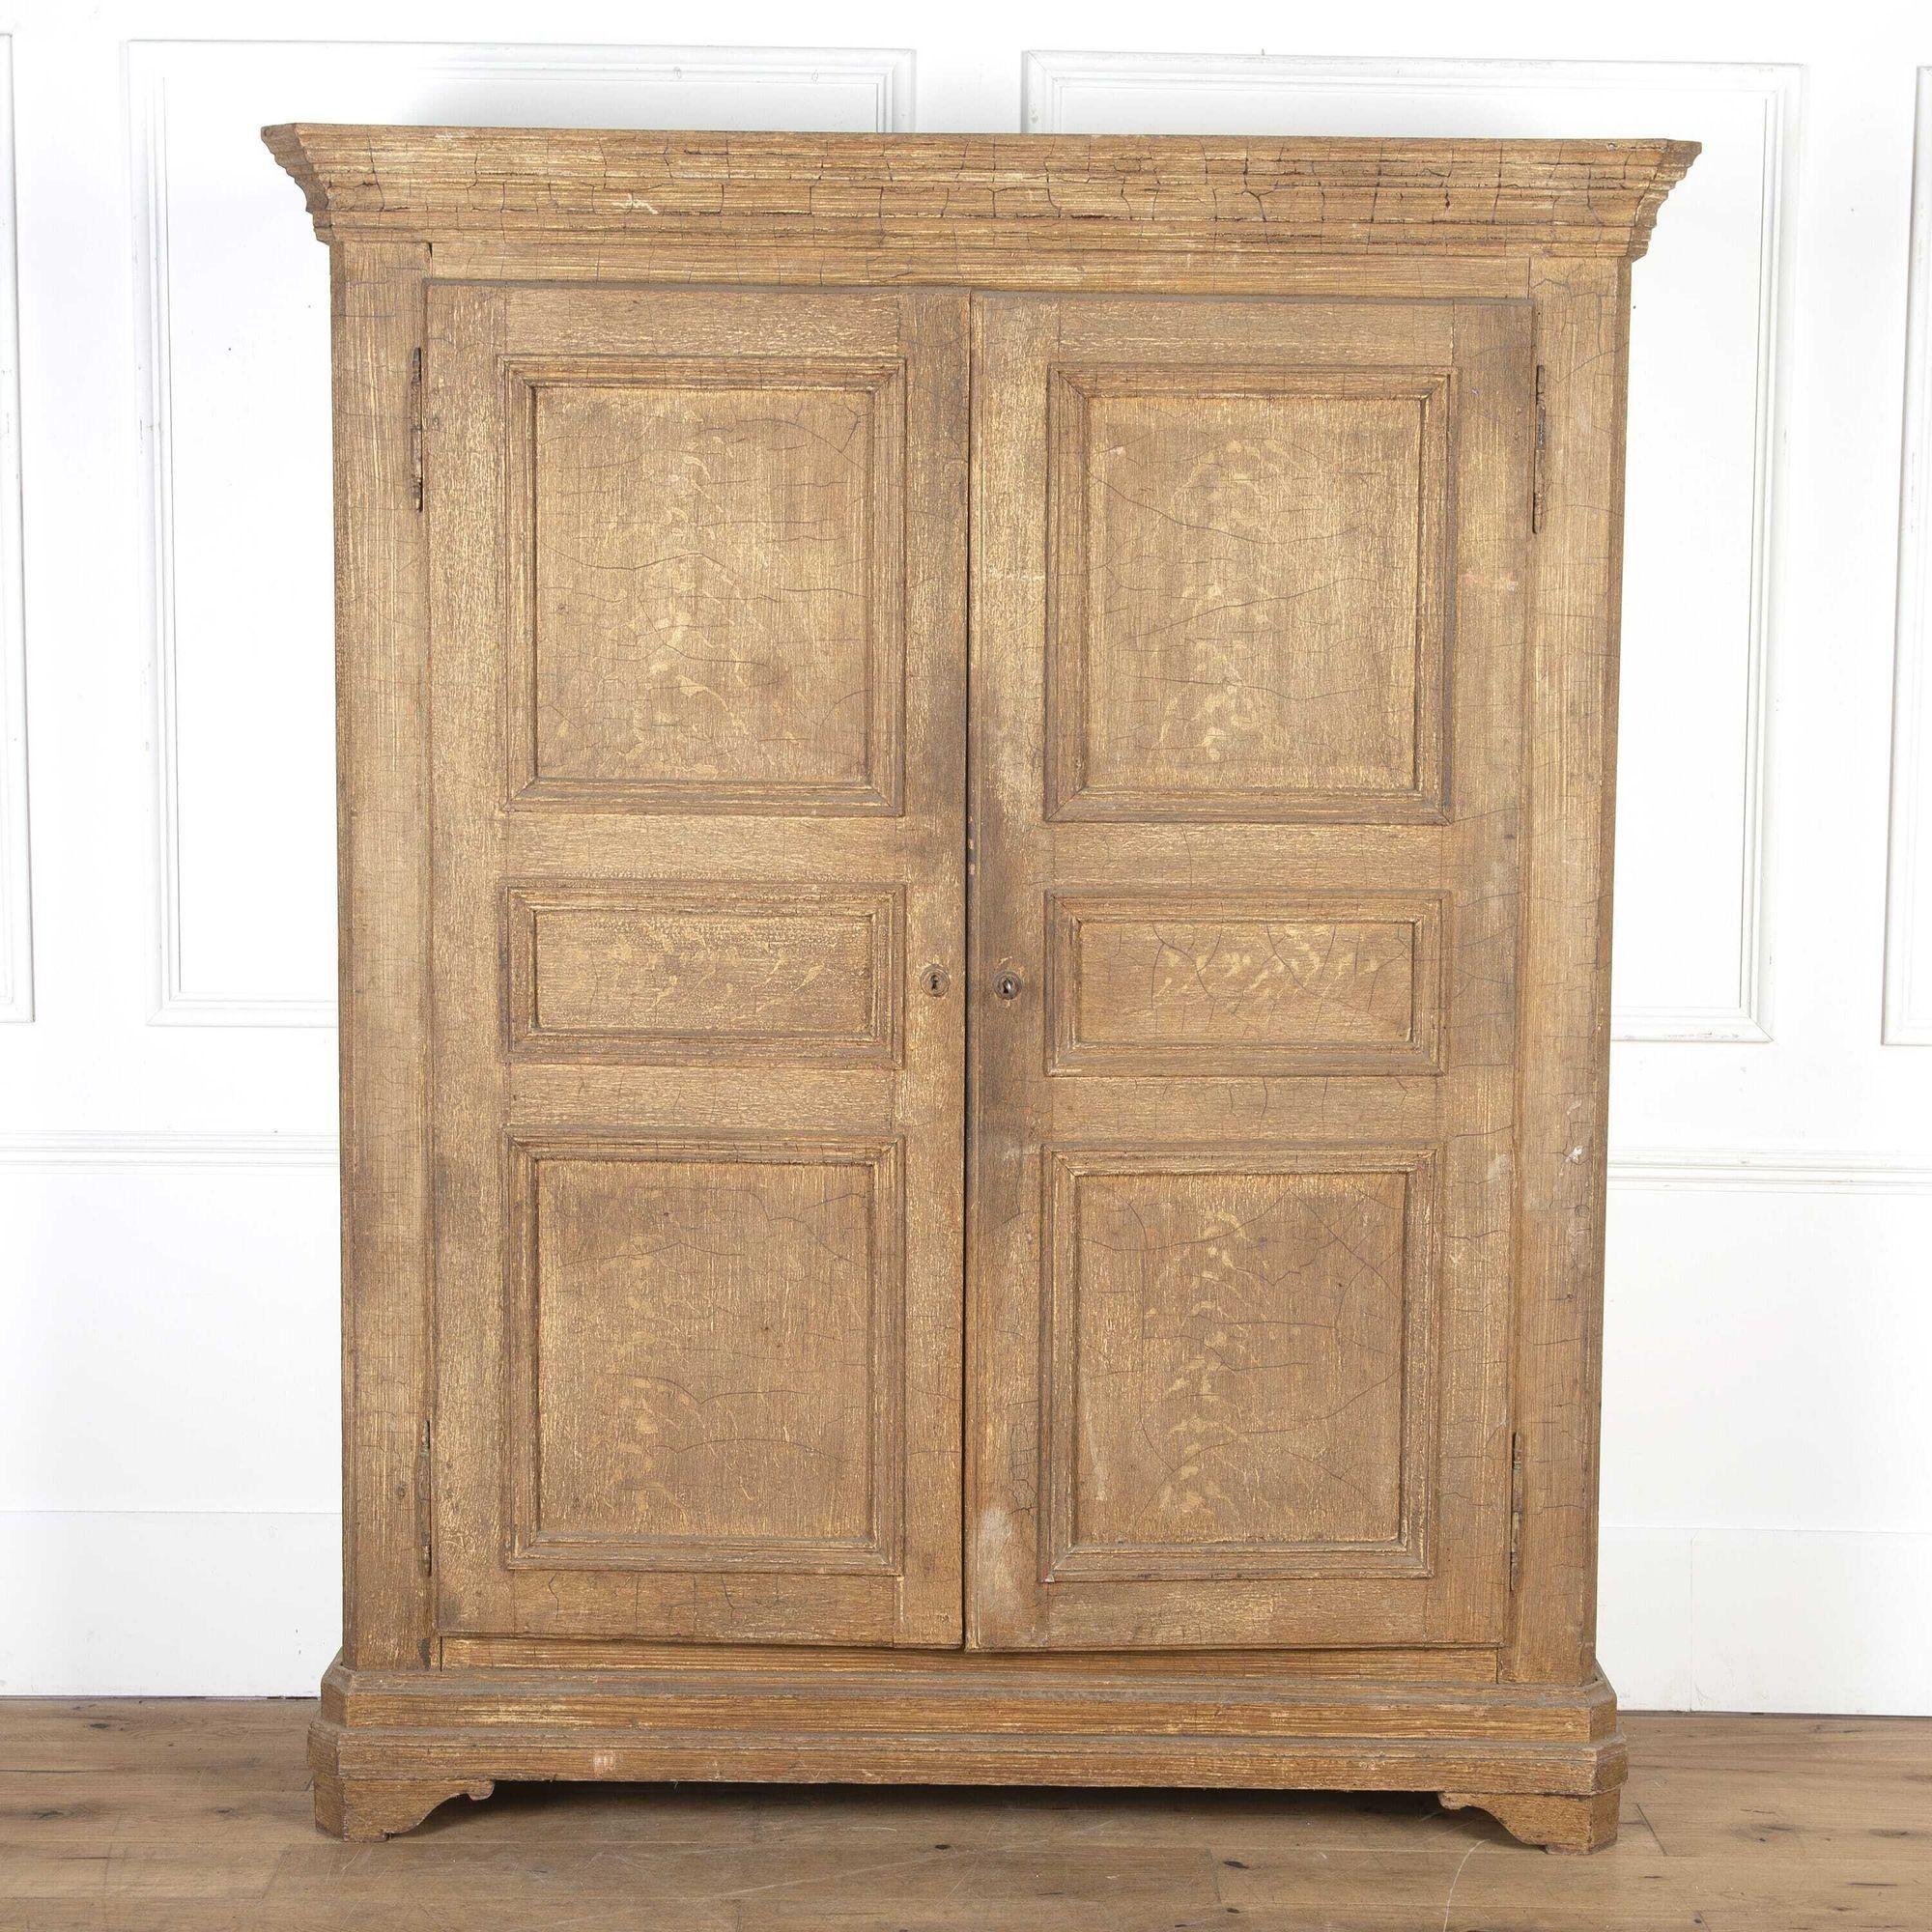 French two-door painted cupboard. 
This lovely example of French craftsmanship has two interior shelves which are perfect for storage. Featuring its original paintwork that is attractively time-worn. The exterior has developed a decorative crackled